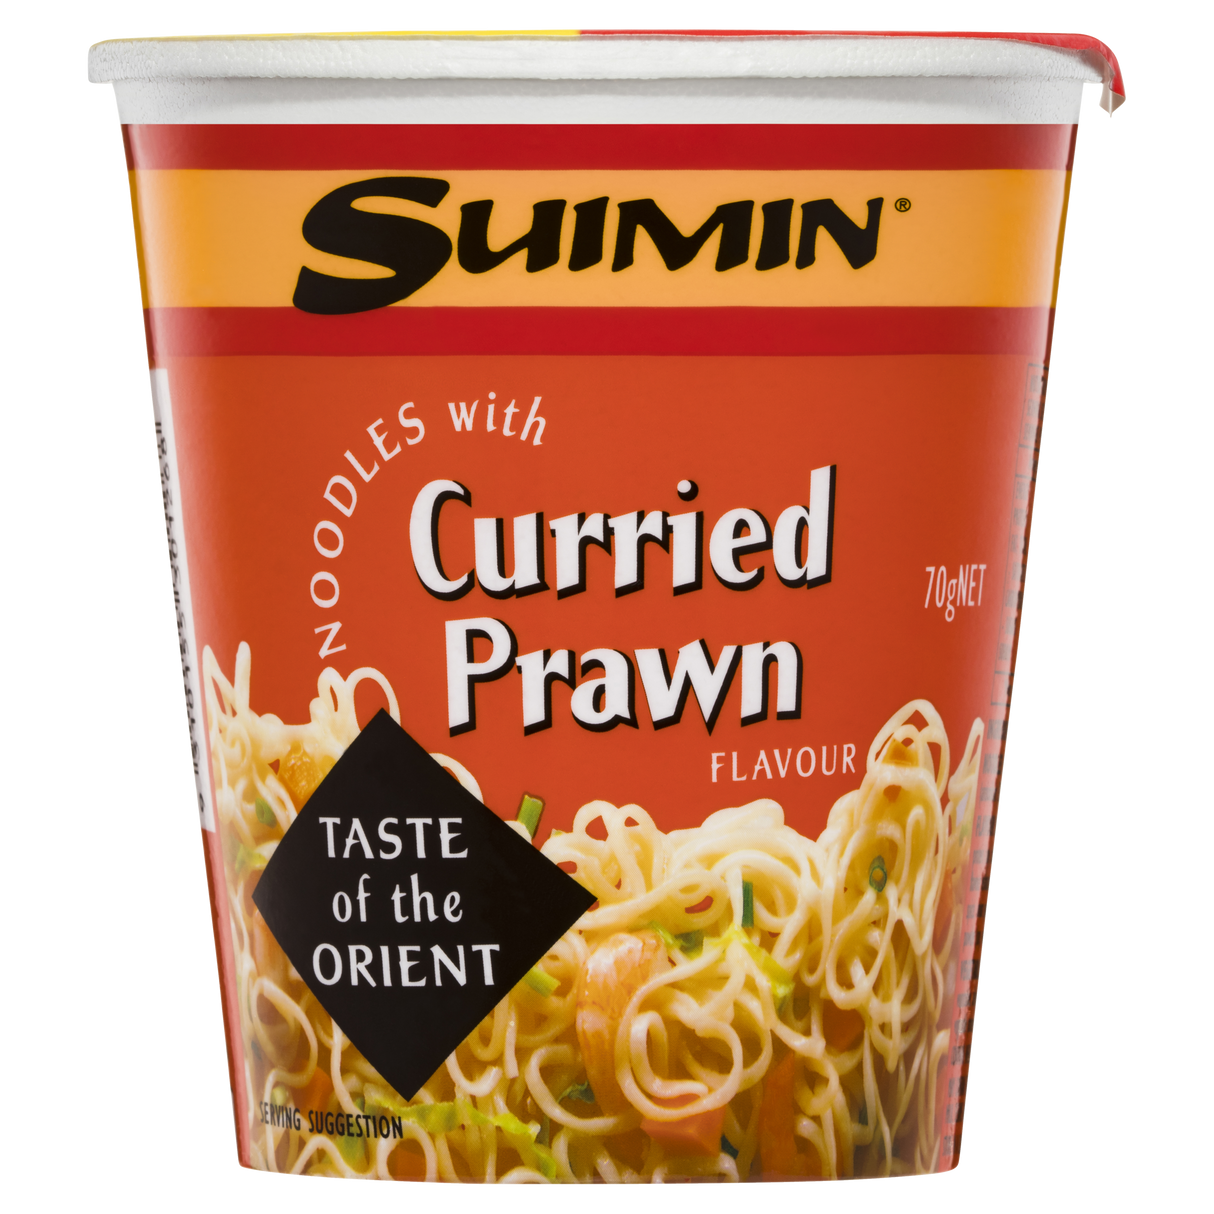 Suimin Noodle Cup Curried Prawn 70g